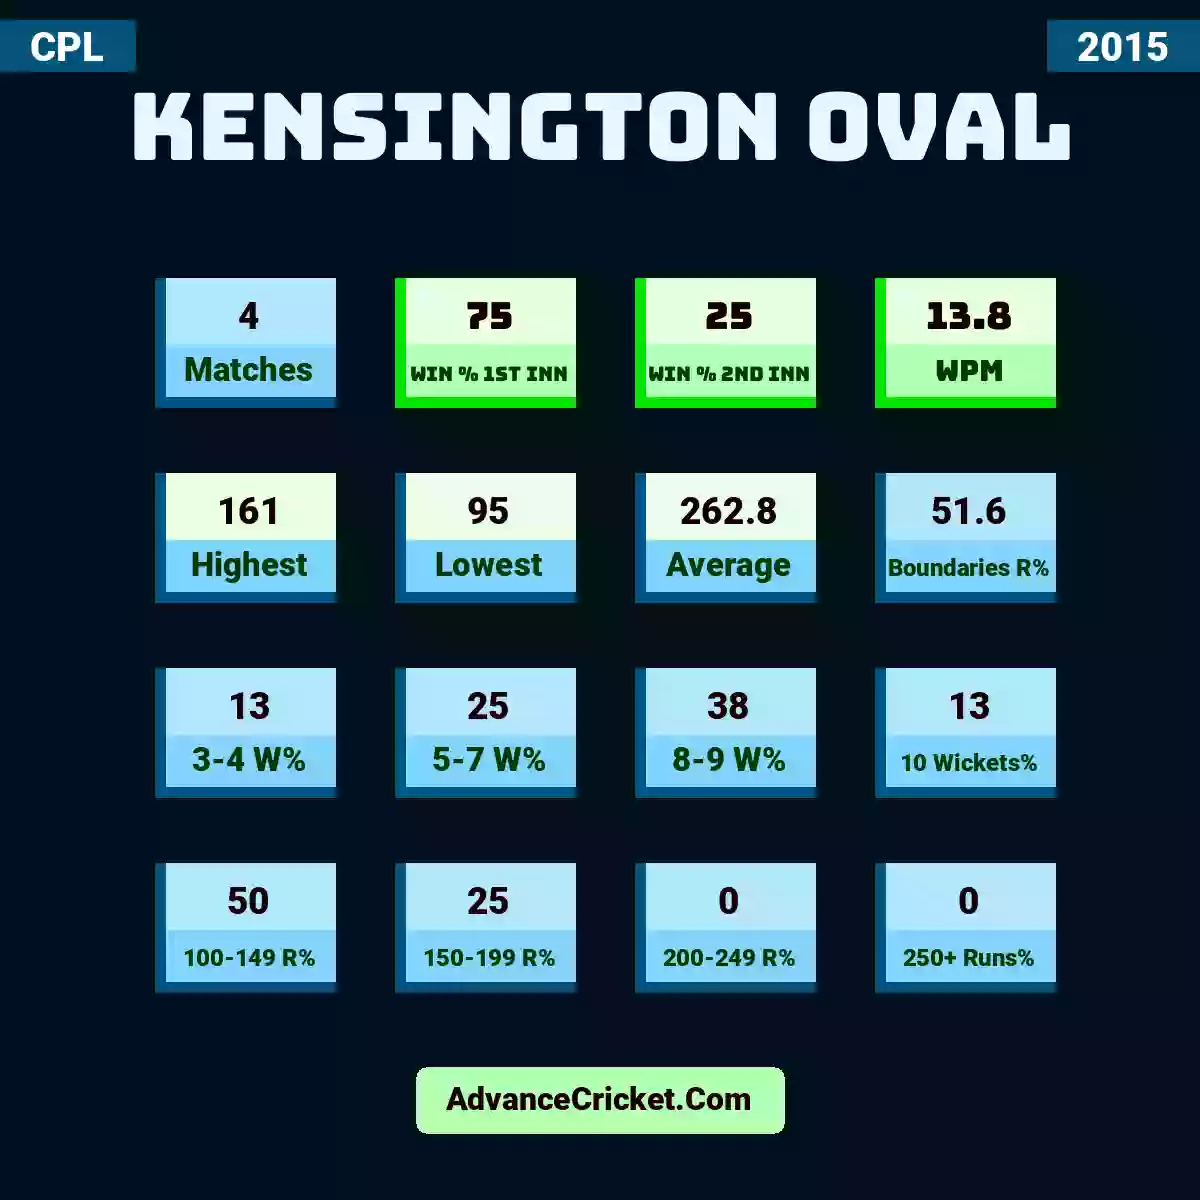 Image showing Kensington Oval with Matches: 4, Win % 1st Inn: 75, Win % 2nd Inn: 25, WPM: 13.8, Highest: 161, Lowest: 95, Average: 262.8, Boundaries R%: 51.6, 3-4 W%: 13, 5-7 W%: 25, 8-9 W%: 38, 10 Wickets%: 13, 100-149 R%: 50, 150-199 R%: 25, 200-249 R%: 0, 250+ Runs%: 0.